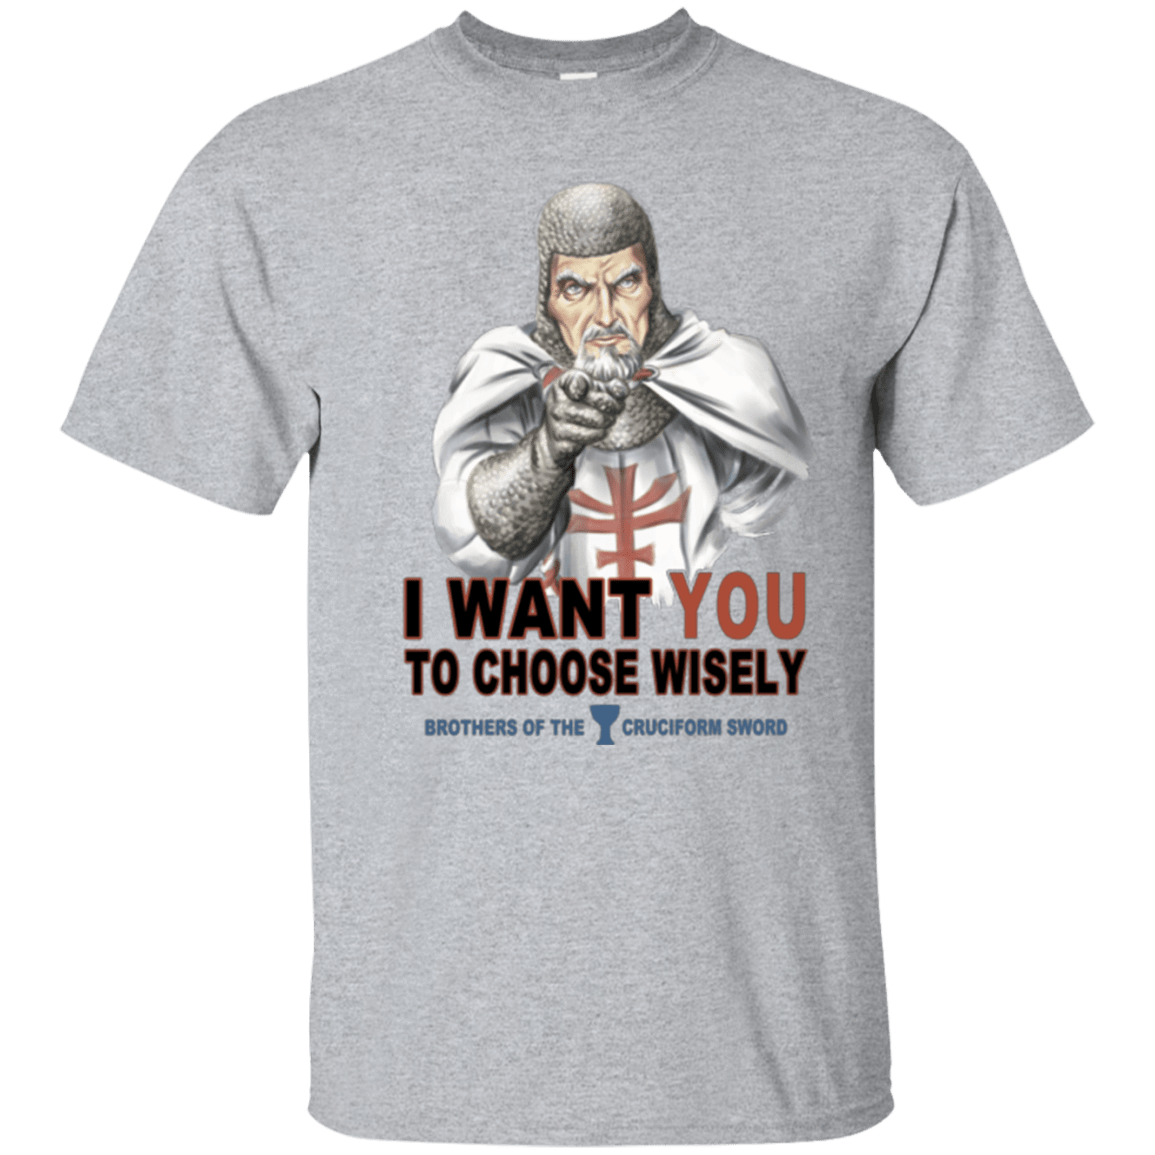 T-Shirts Sport Grey / Small Choose Wisely T-Shirt